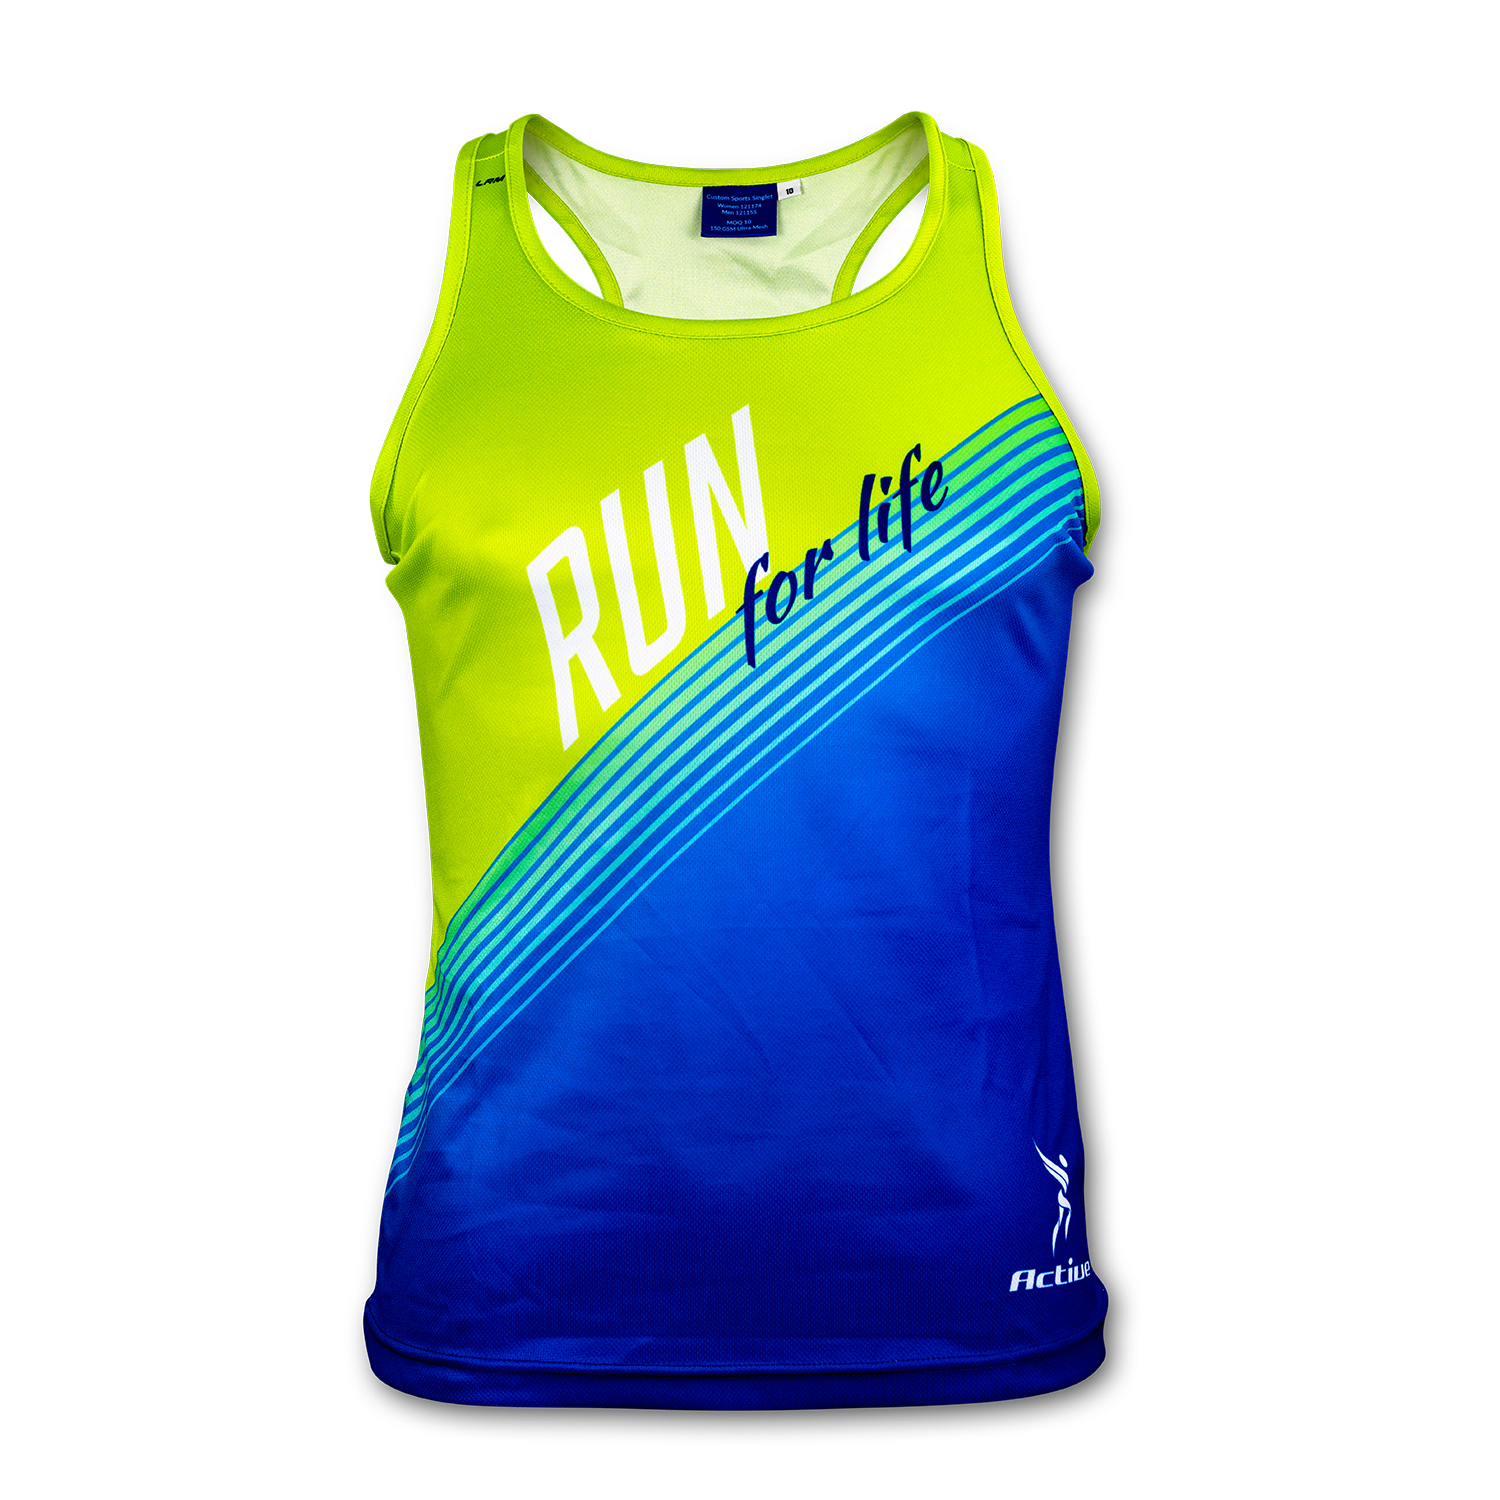 Custom Sports Singlet - Womens - Front of singlet - personalize with your  brand colours and logo!